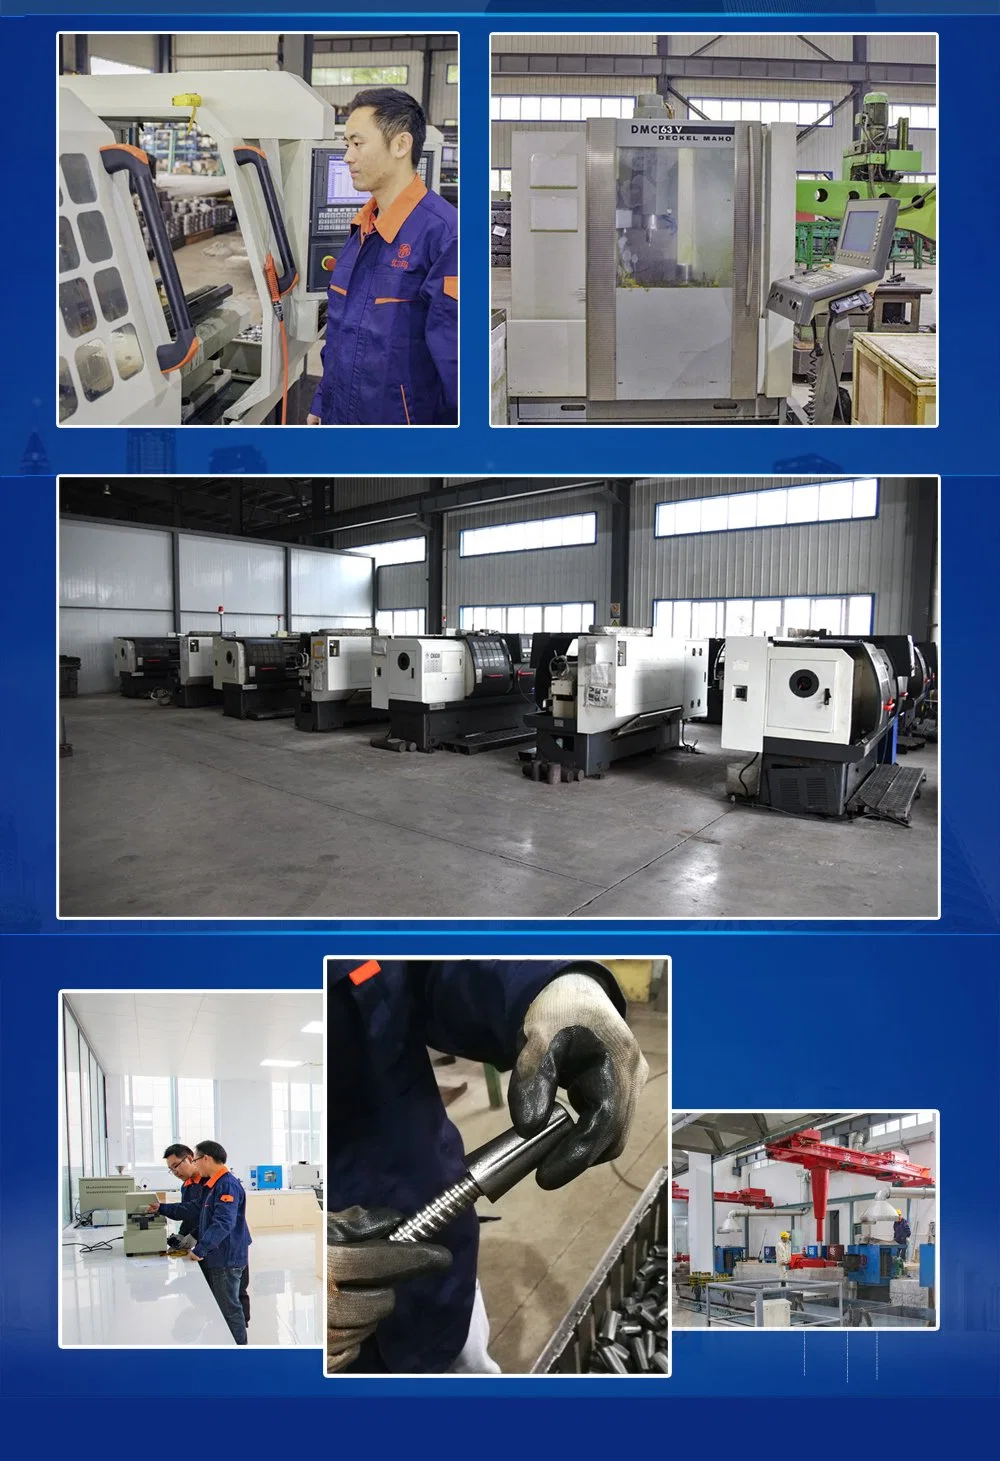 Machining,Forging,Stamping,Accessories,Decoration,Component,Construction,Warehouse,Basement,Wire System,Hanging,Lighting,Basement,Mating Facility,Hot Galvanized